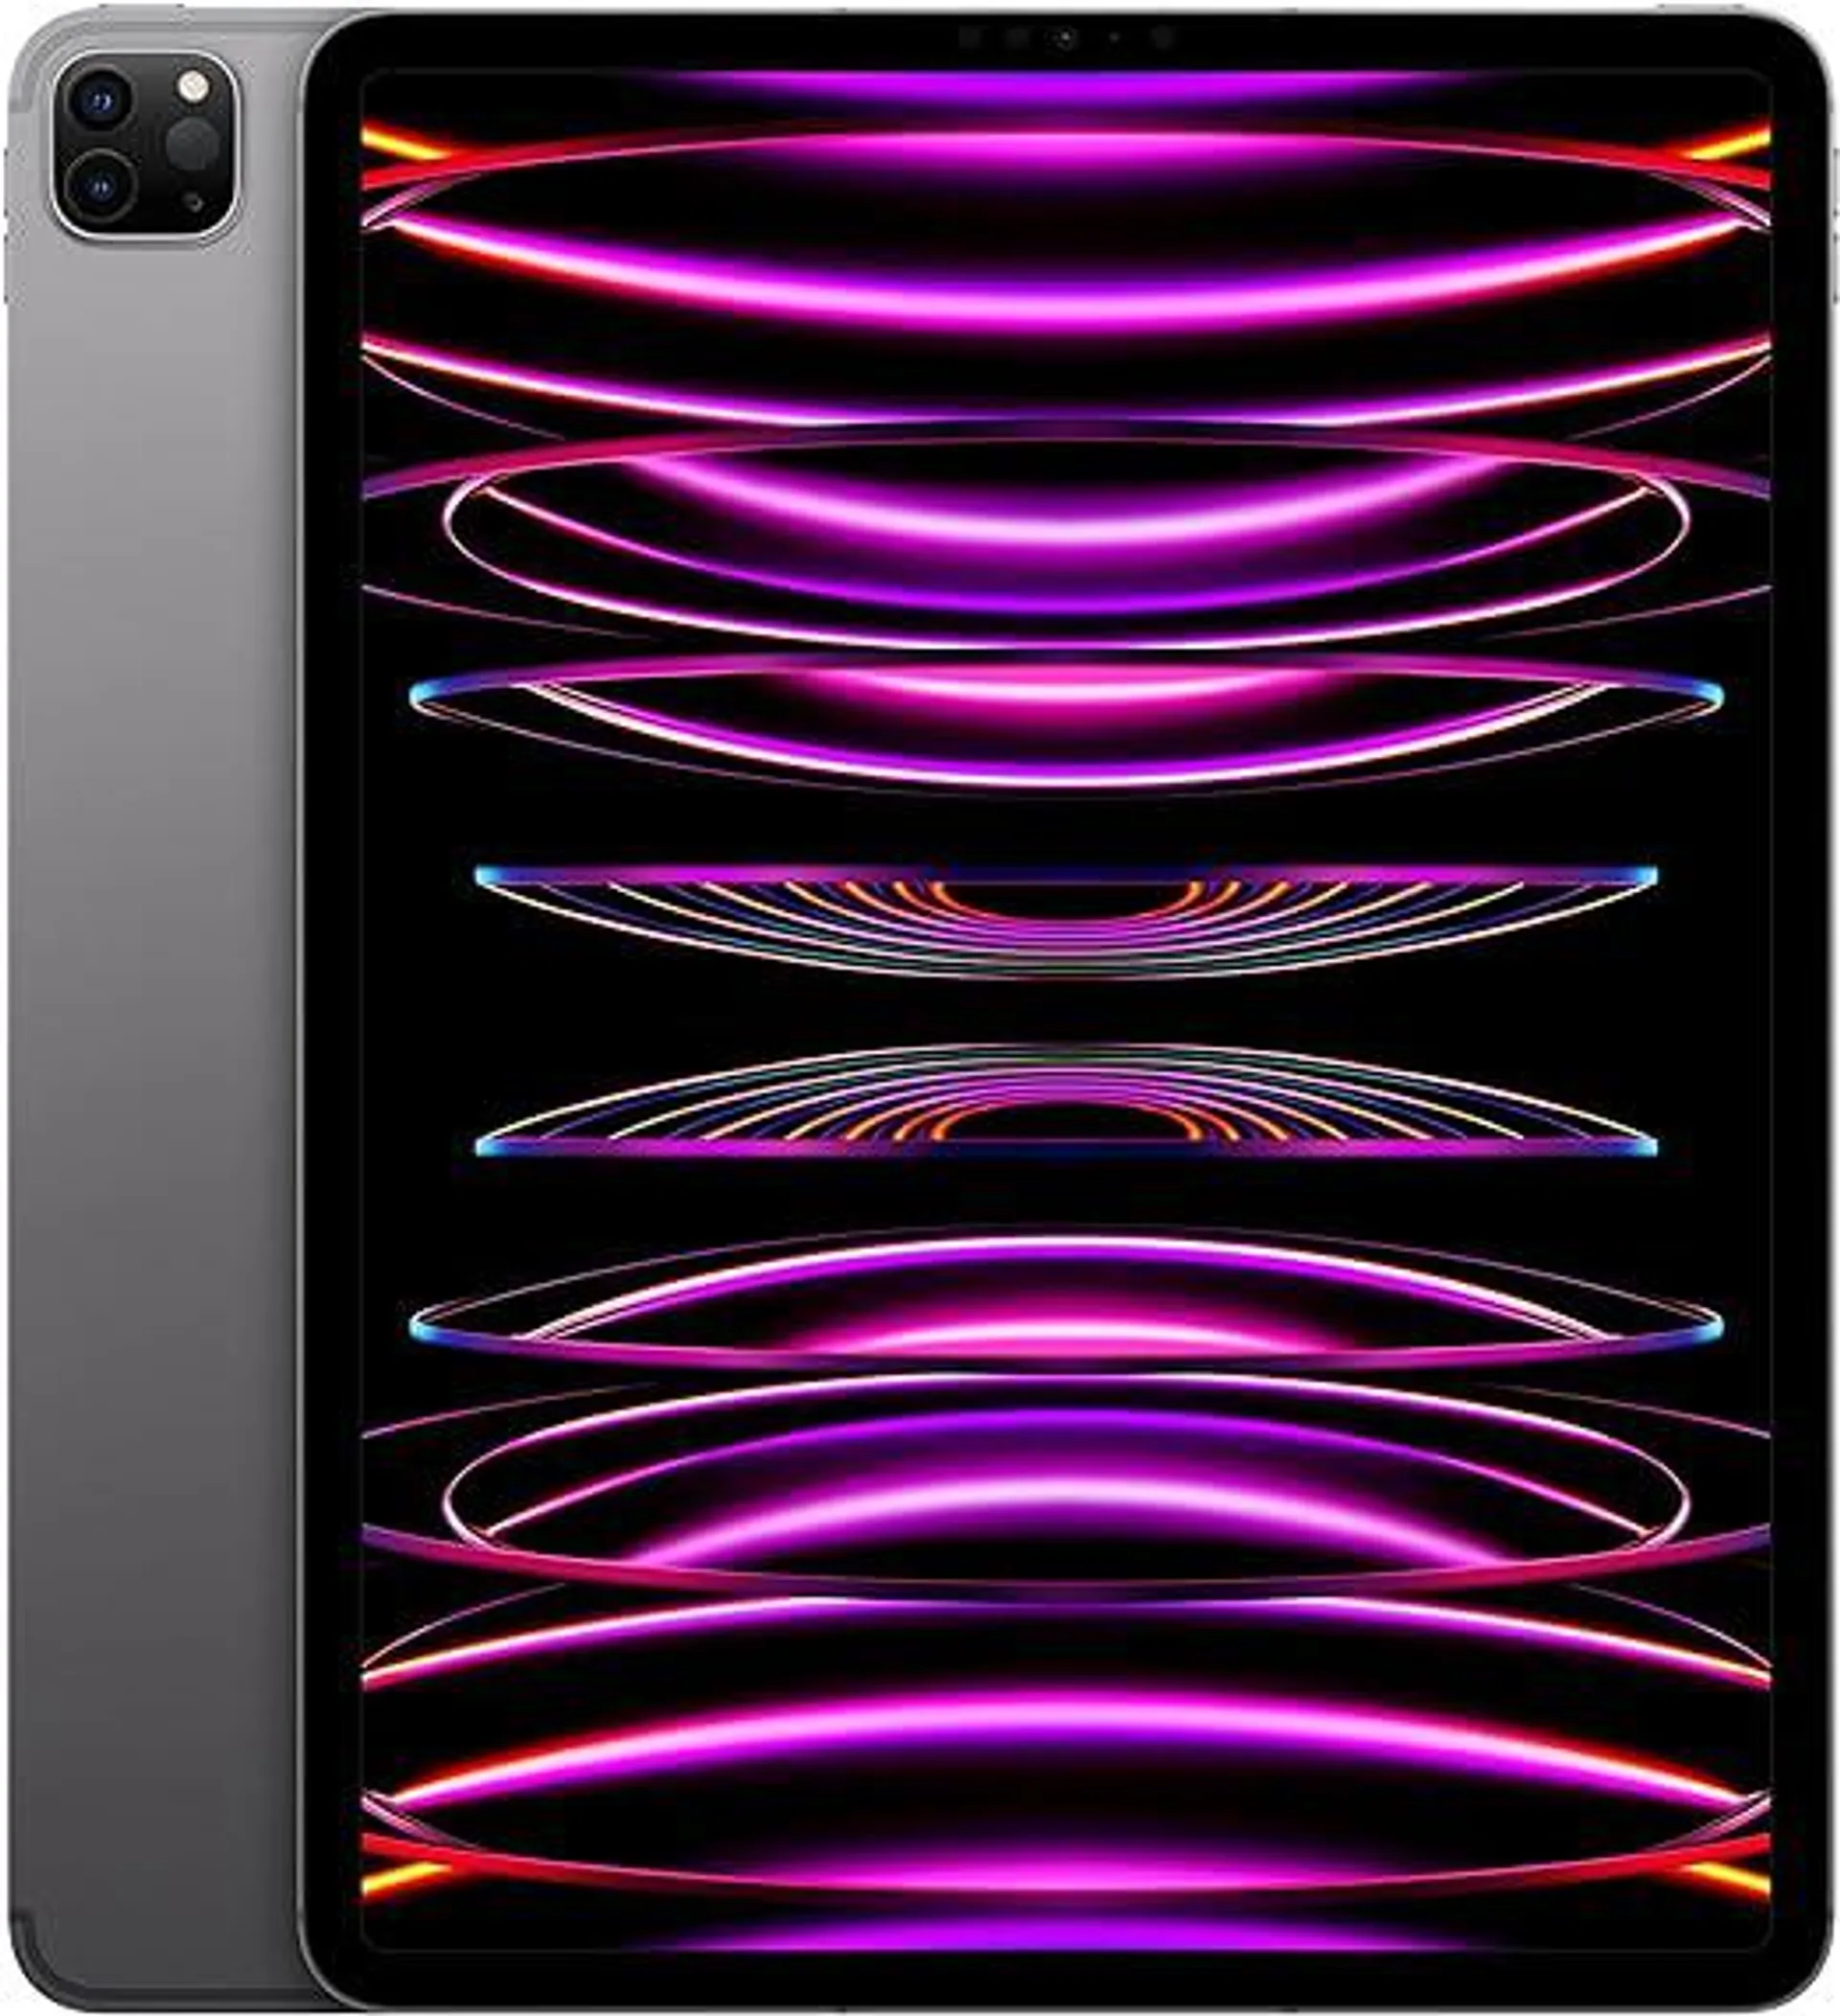 Apple iPad Pro 12.9-inch (6th Generation): with M2 chip, Liquid Retina XDR Display, 256GB, Wi-Fi 6E + 5G Cellular, 12MP front/12MP and 10MP Back Cameras, Face ID, All-Day Battery Life – Space Gray